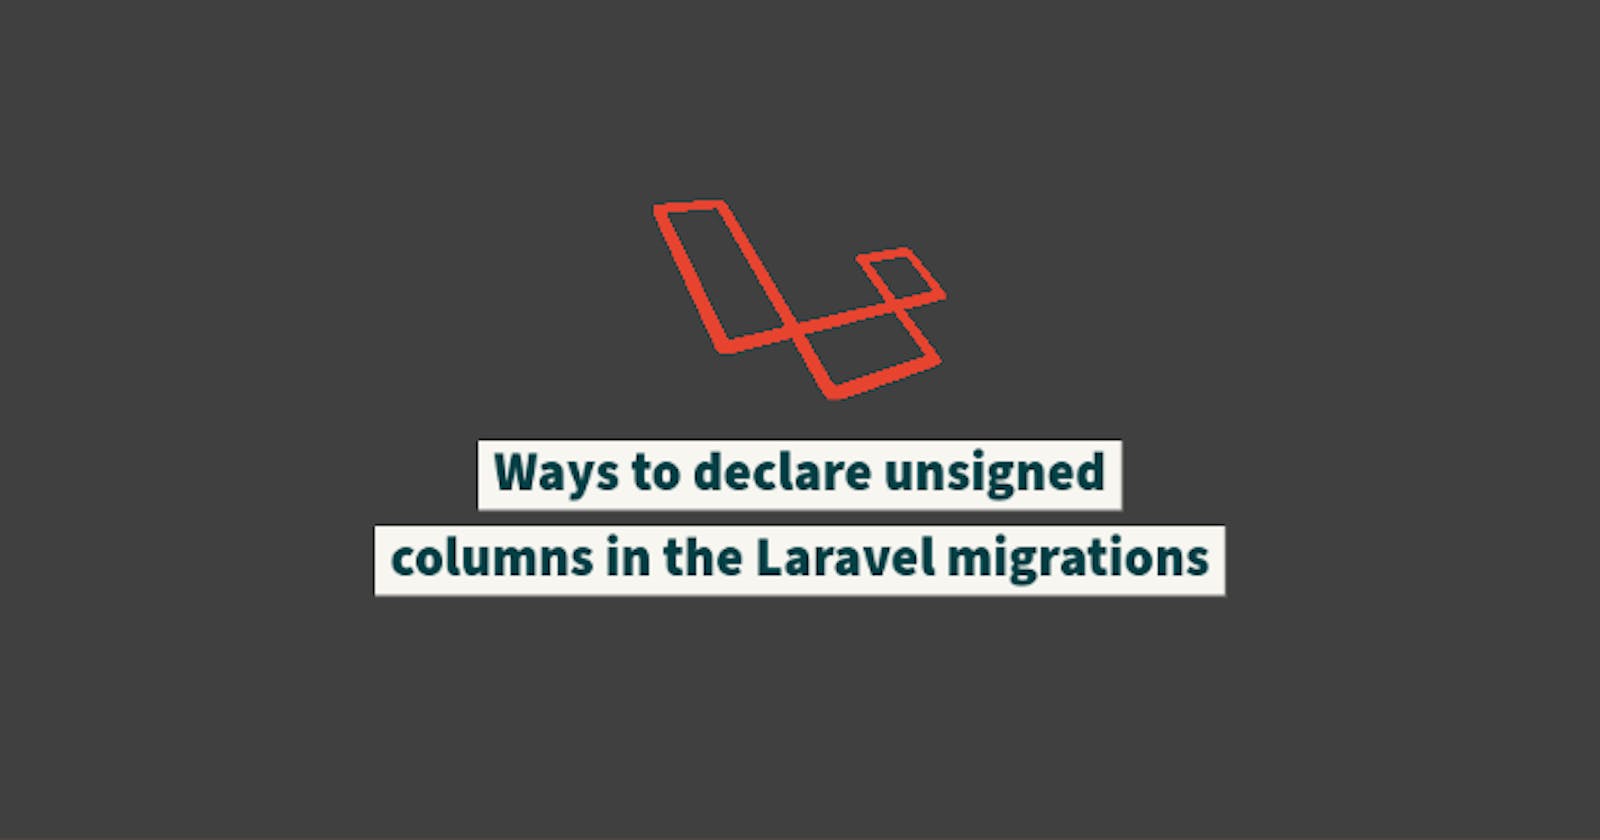 Ways to declare unsigned columns in the Laravel migrations